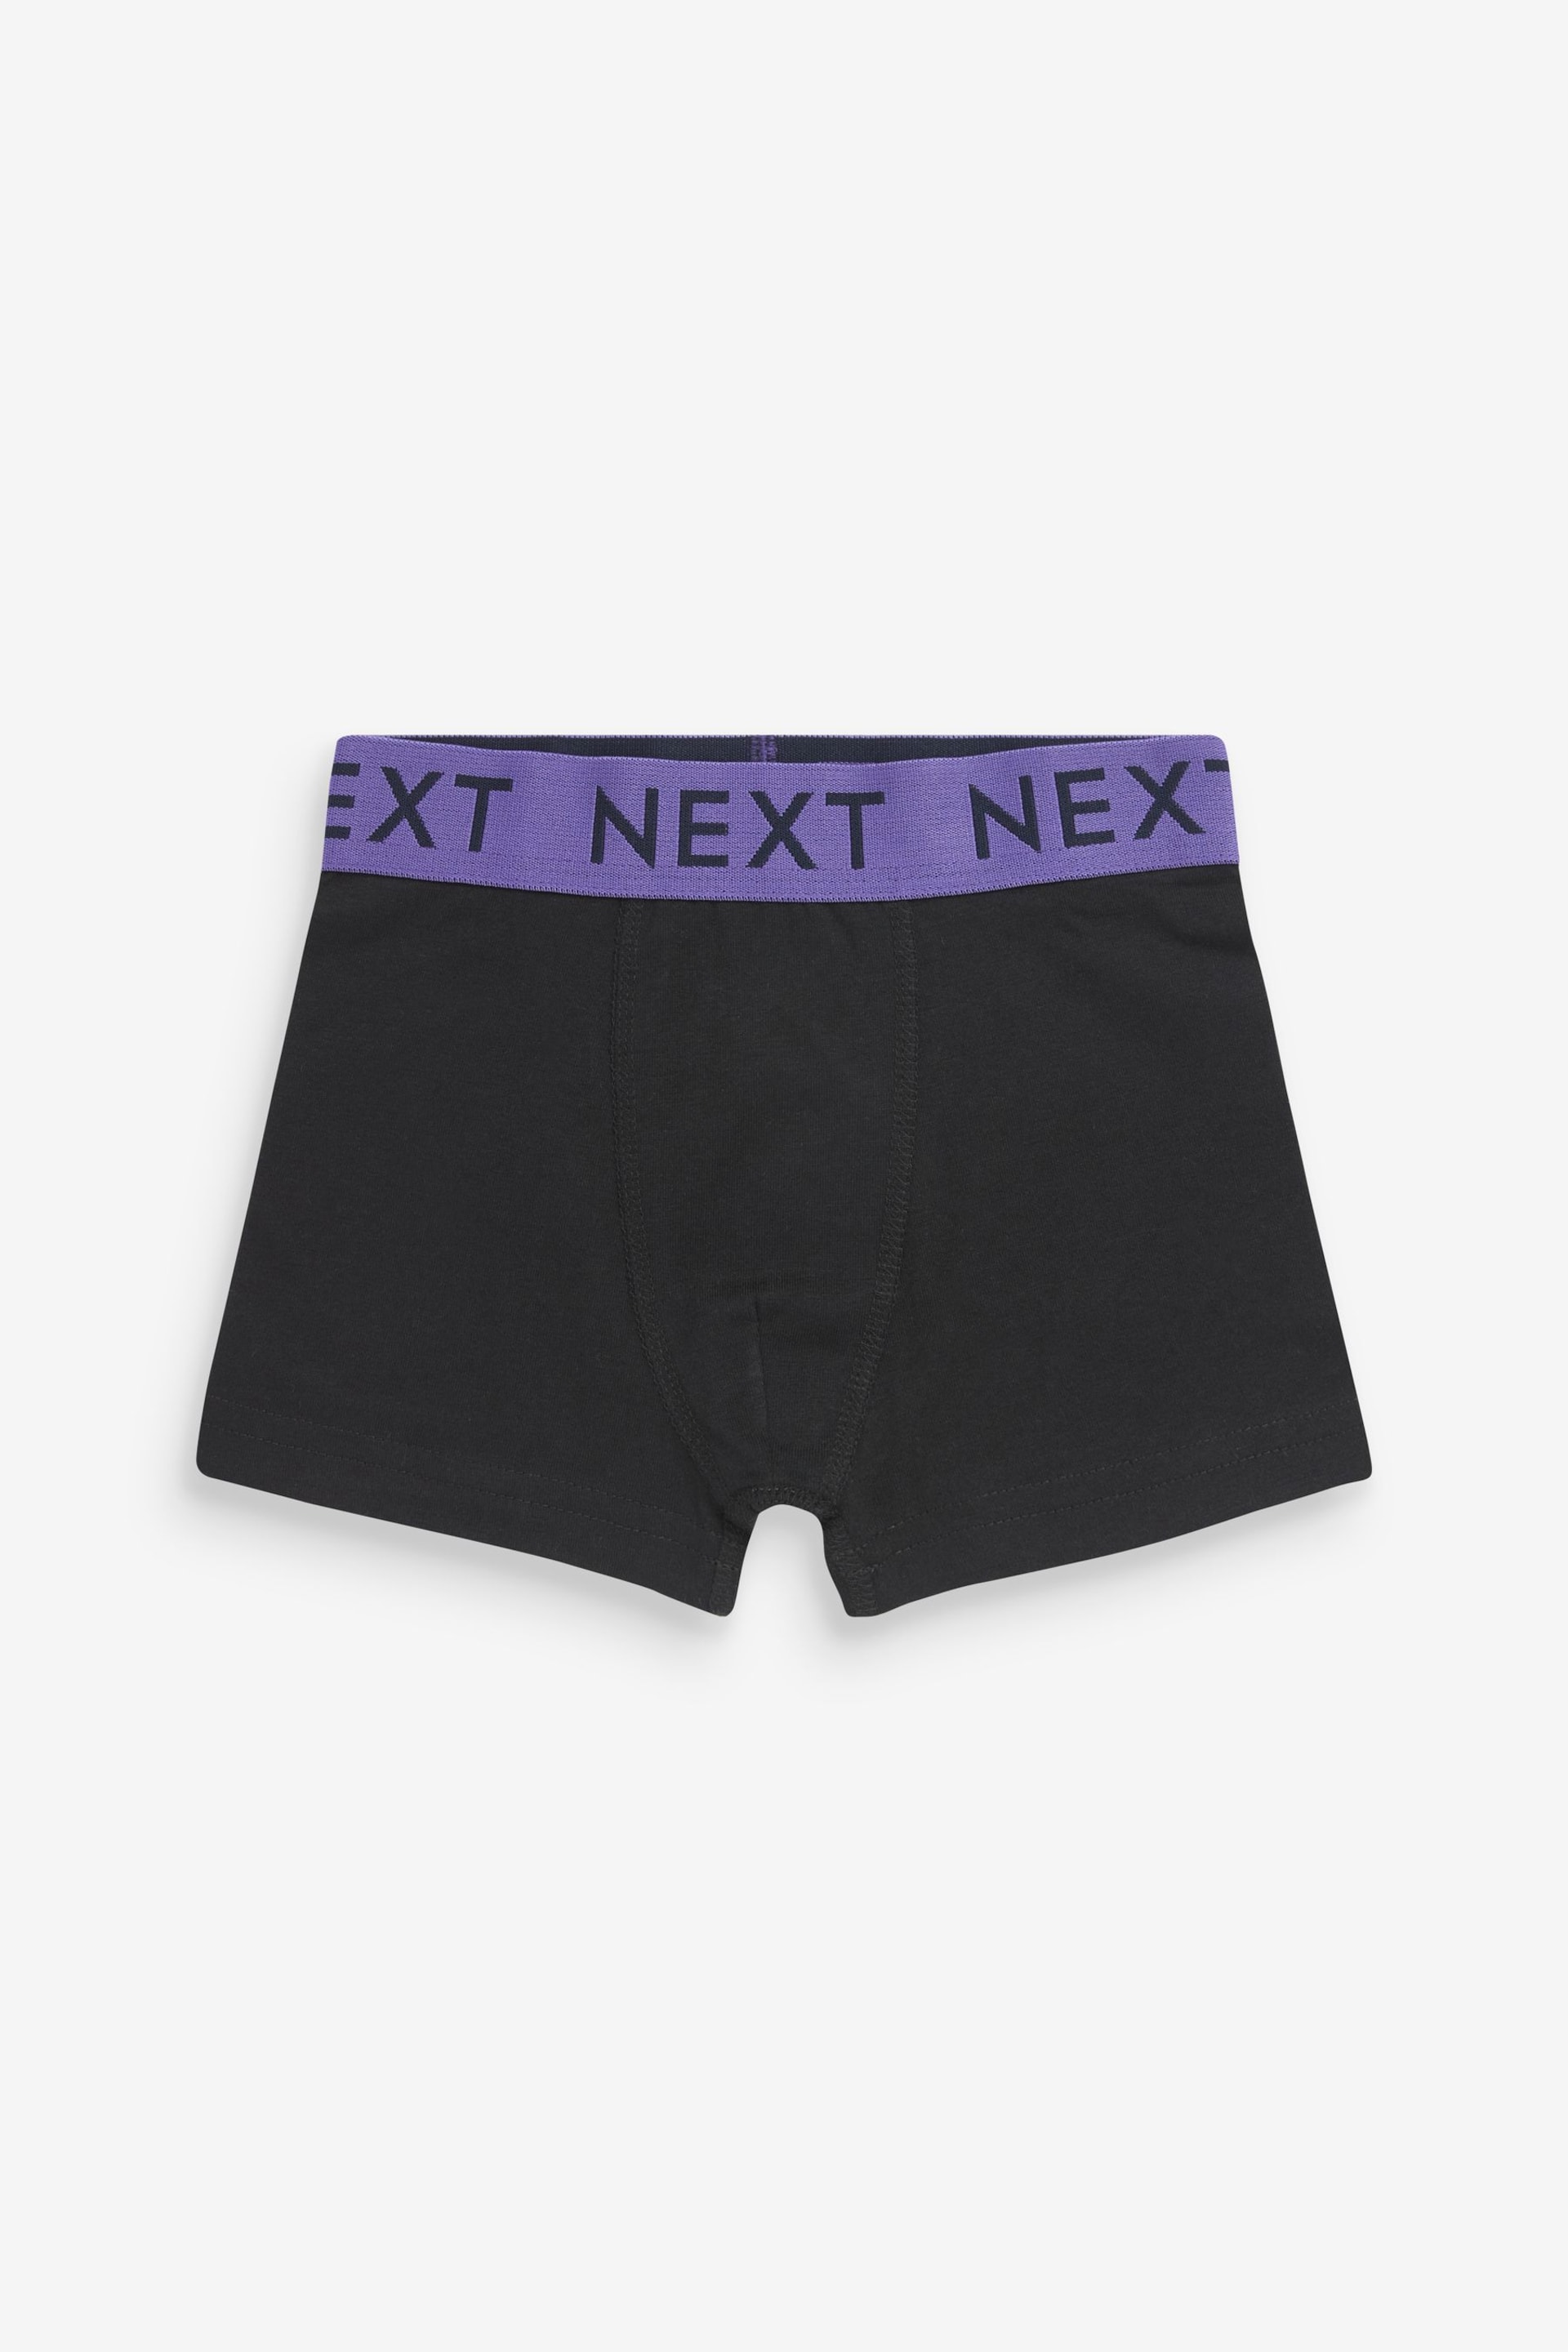 Black Bright Waistband Trunks 10 Pack (1.5-16yrs) - Image 8 of 12